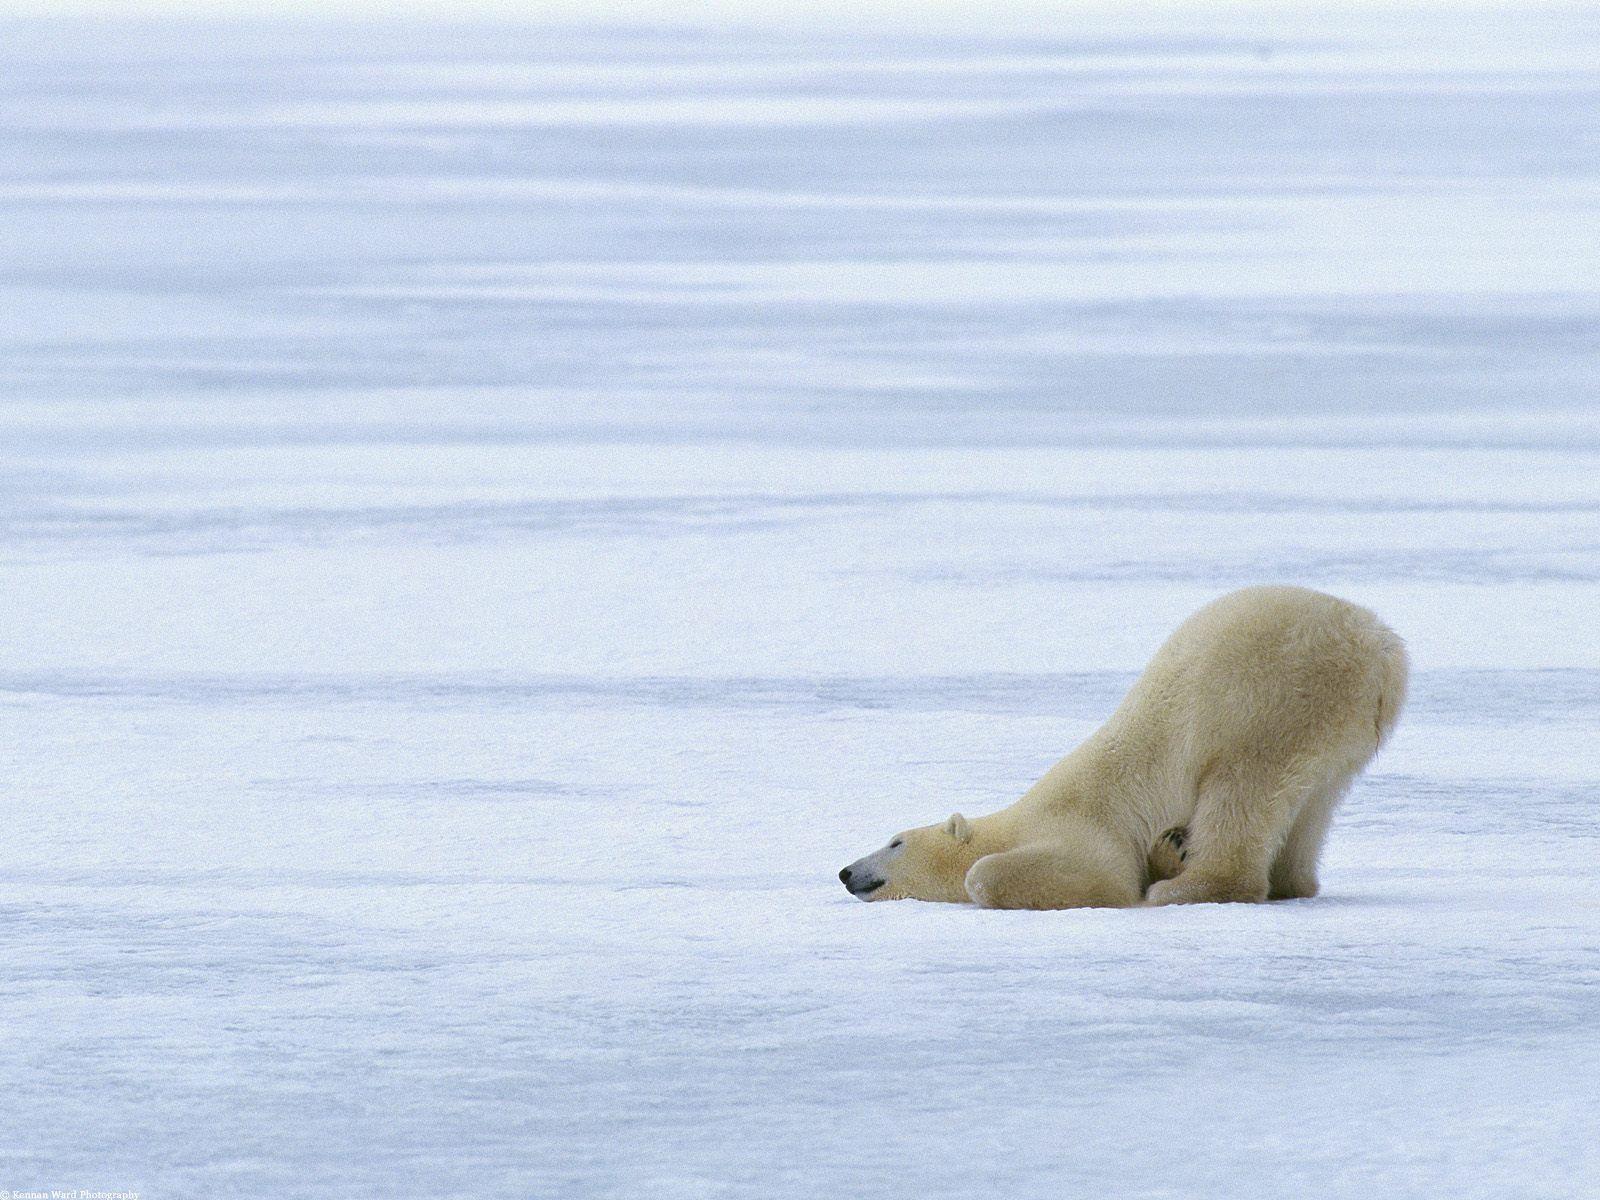 Wallpaper > Animals > POLAR BEAR STRETCHING AFTER A LONG TIME